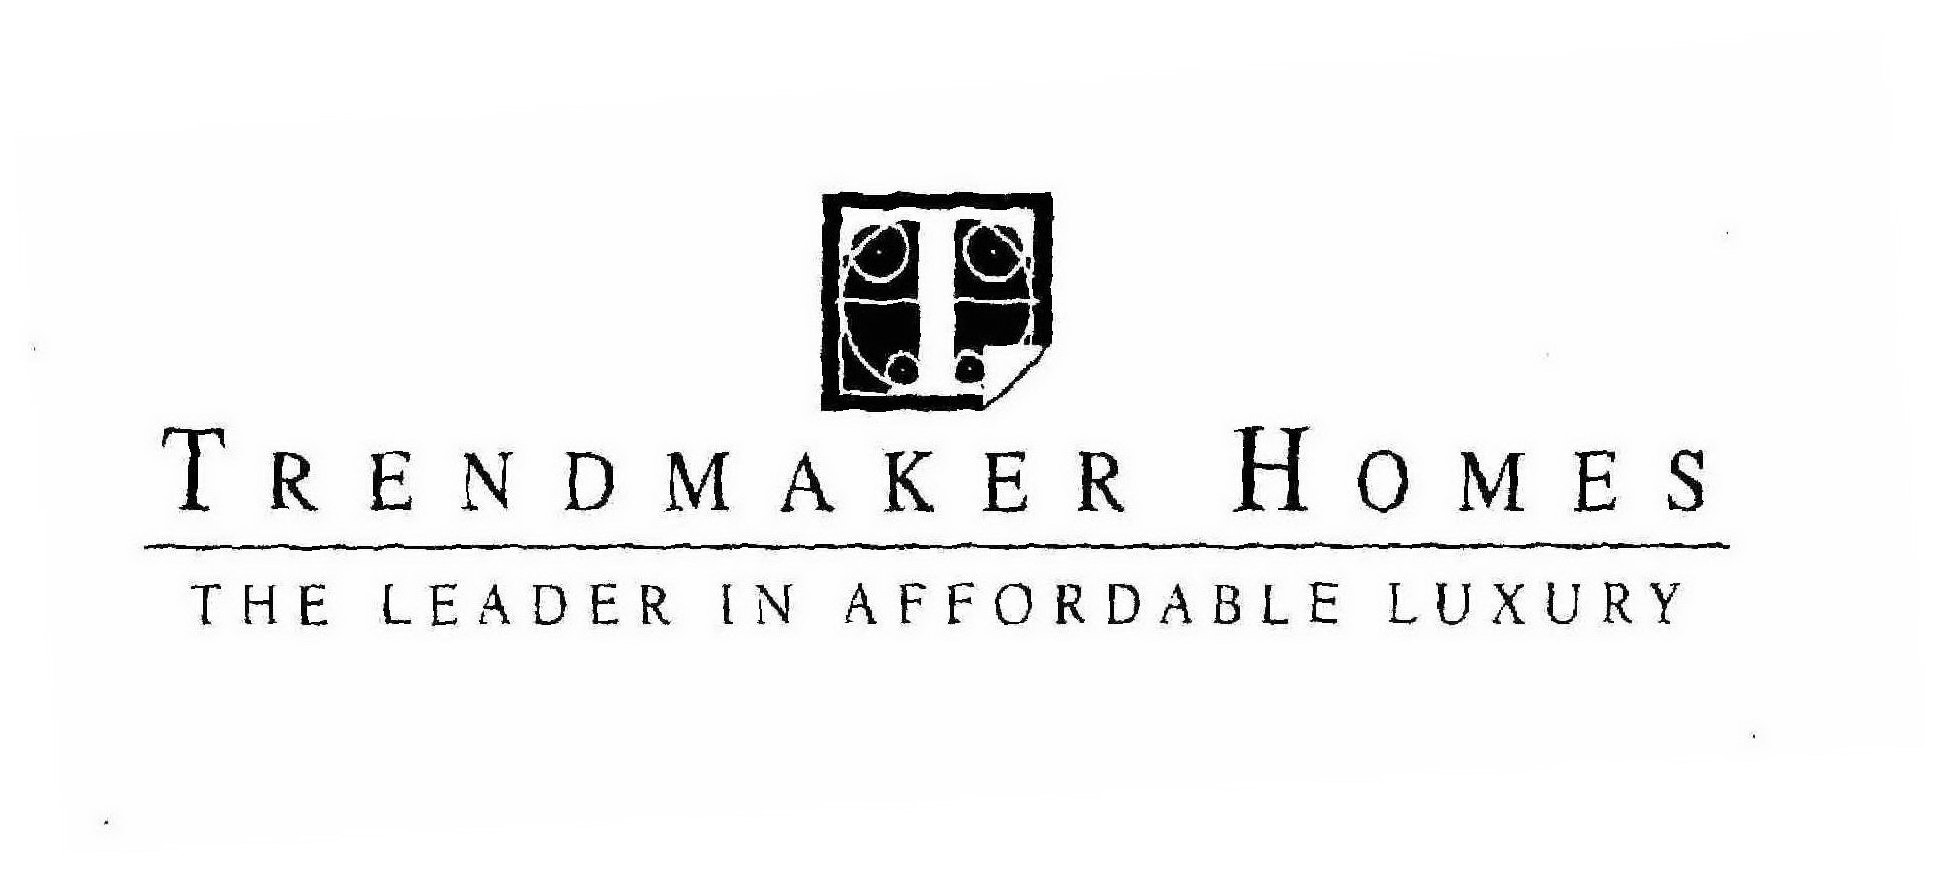  TRENDMAKER HOMES THE LEADER IN AFFORDABLE LUXURY